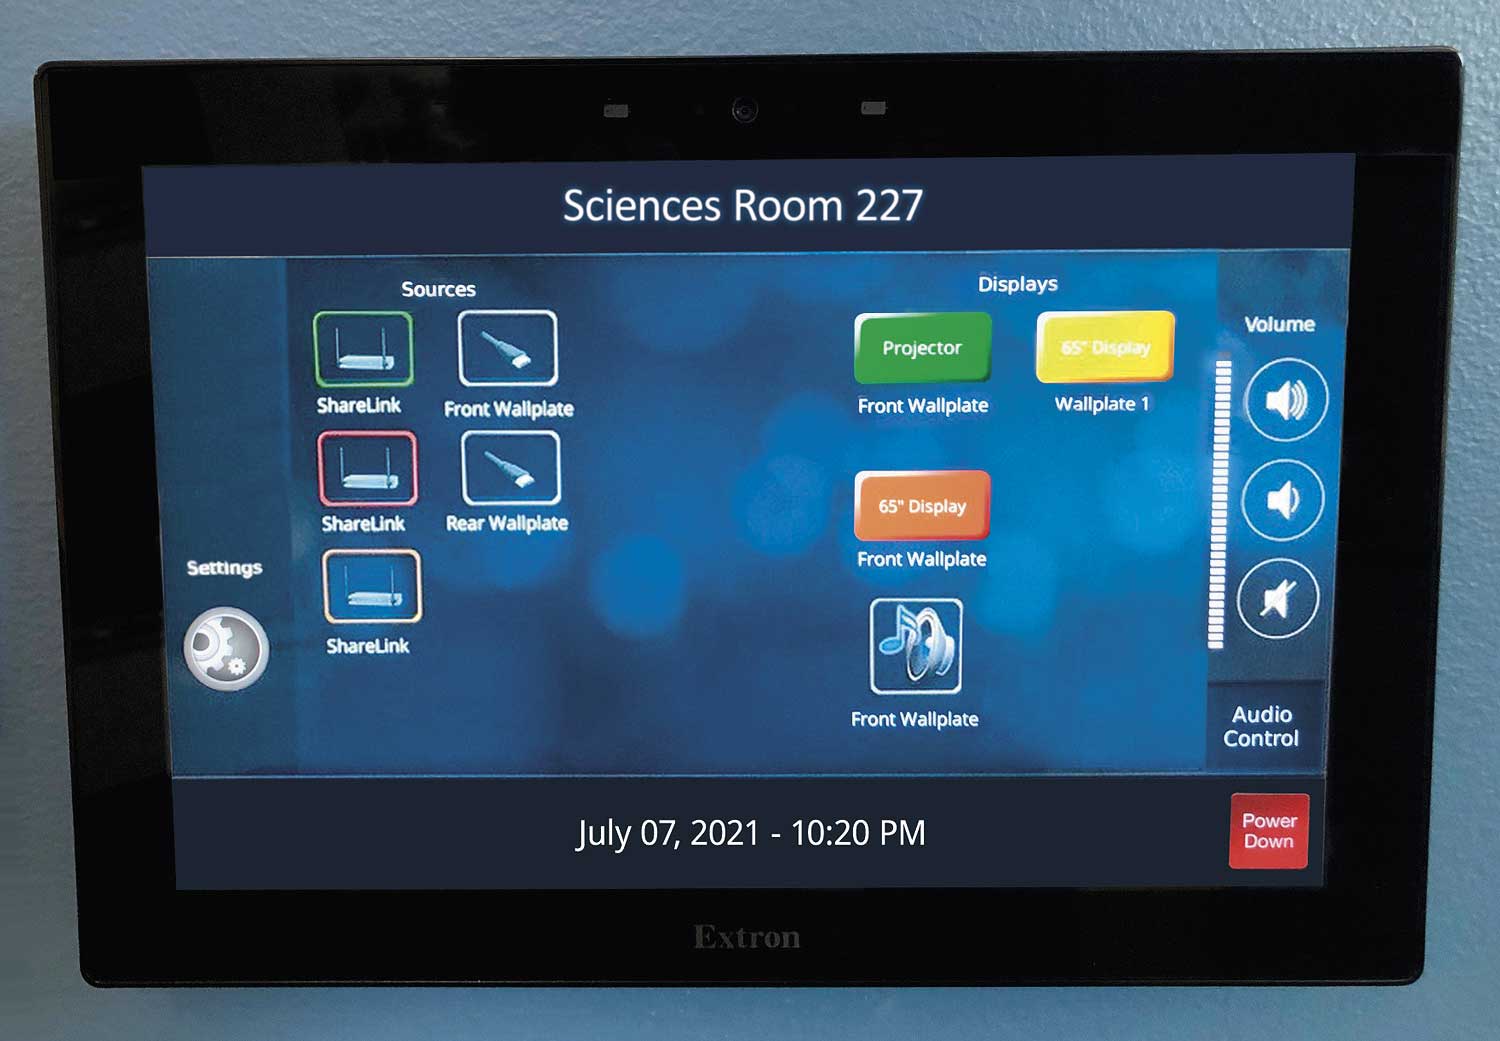 All AV-enabled instructional spaces display the same intuitive interactive touchpanel interface, providing a uniform AV control experience for users in every room.